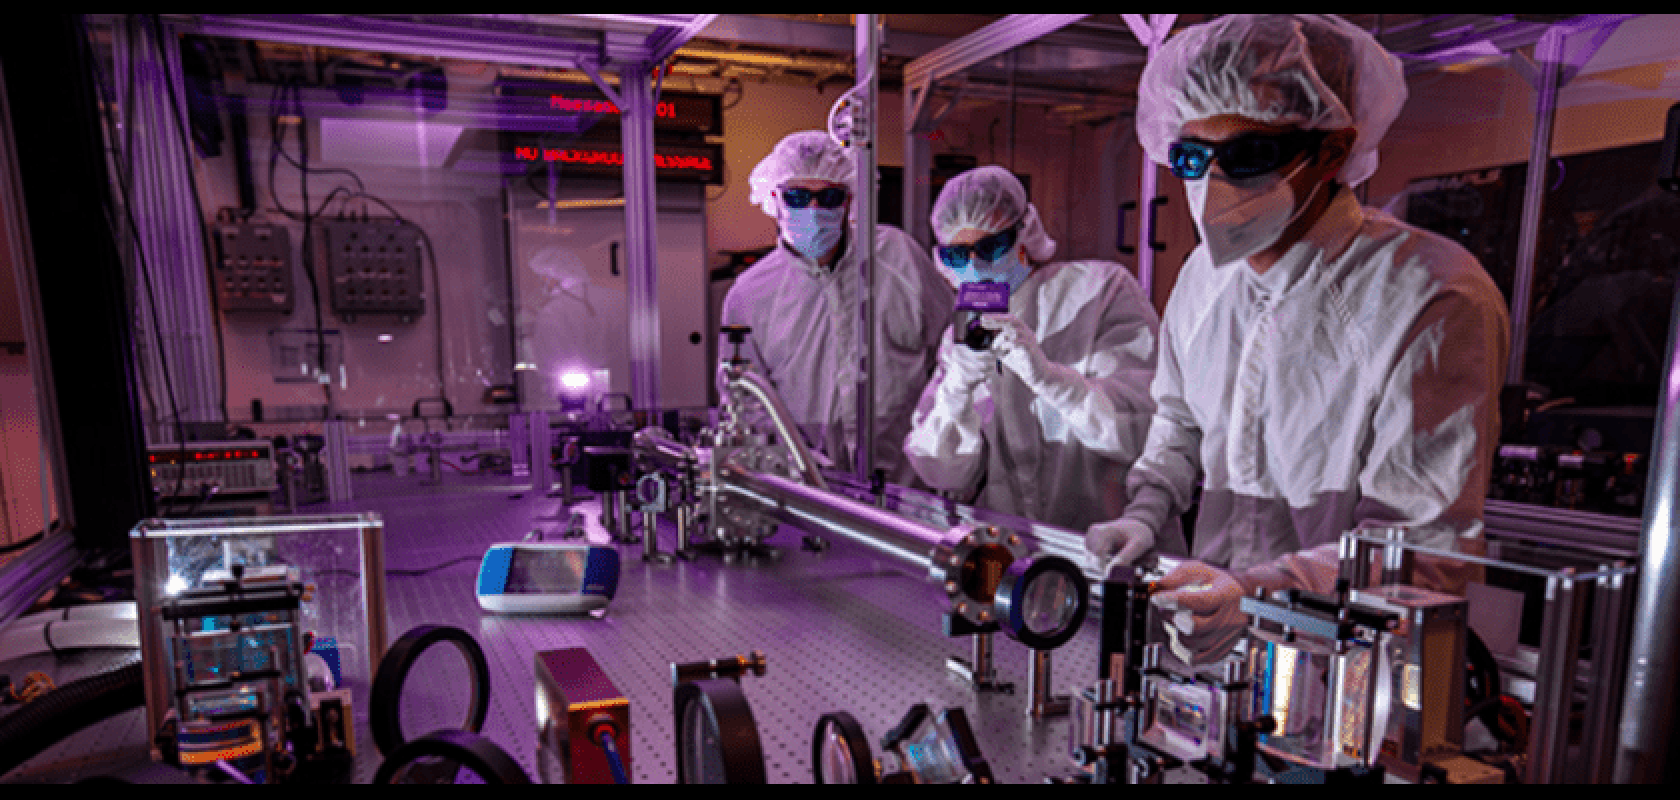 Researchers work on a prototype laser system, developed as part of the project (Image: Lawrence Livermore National Laboratory)